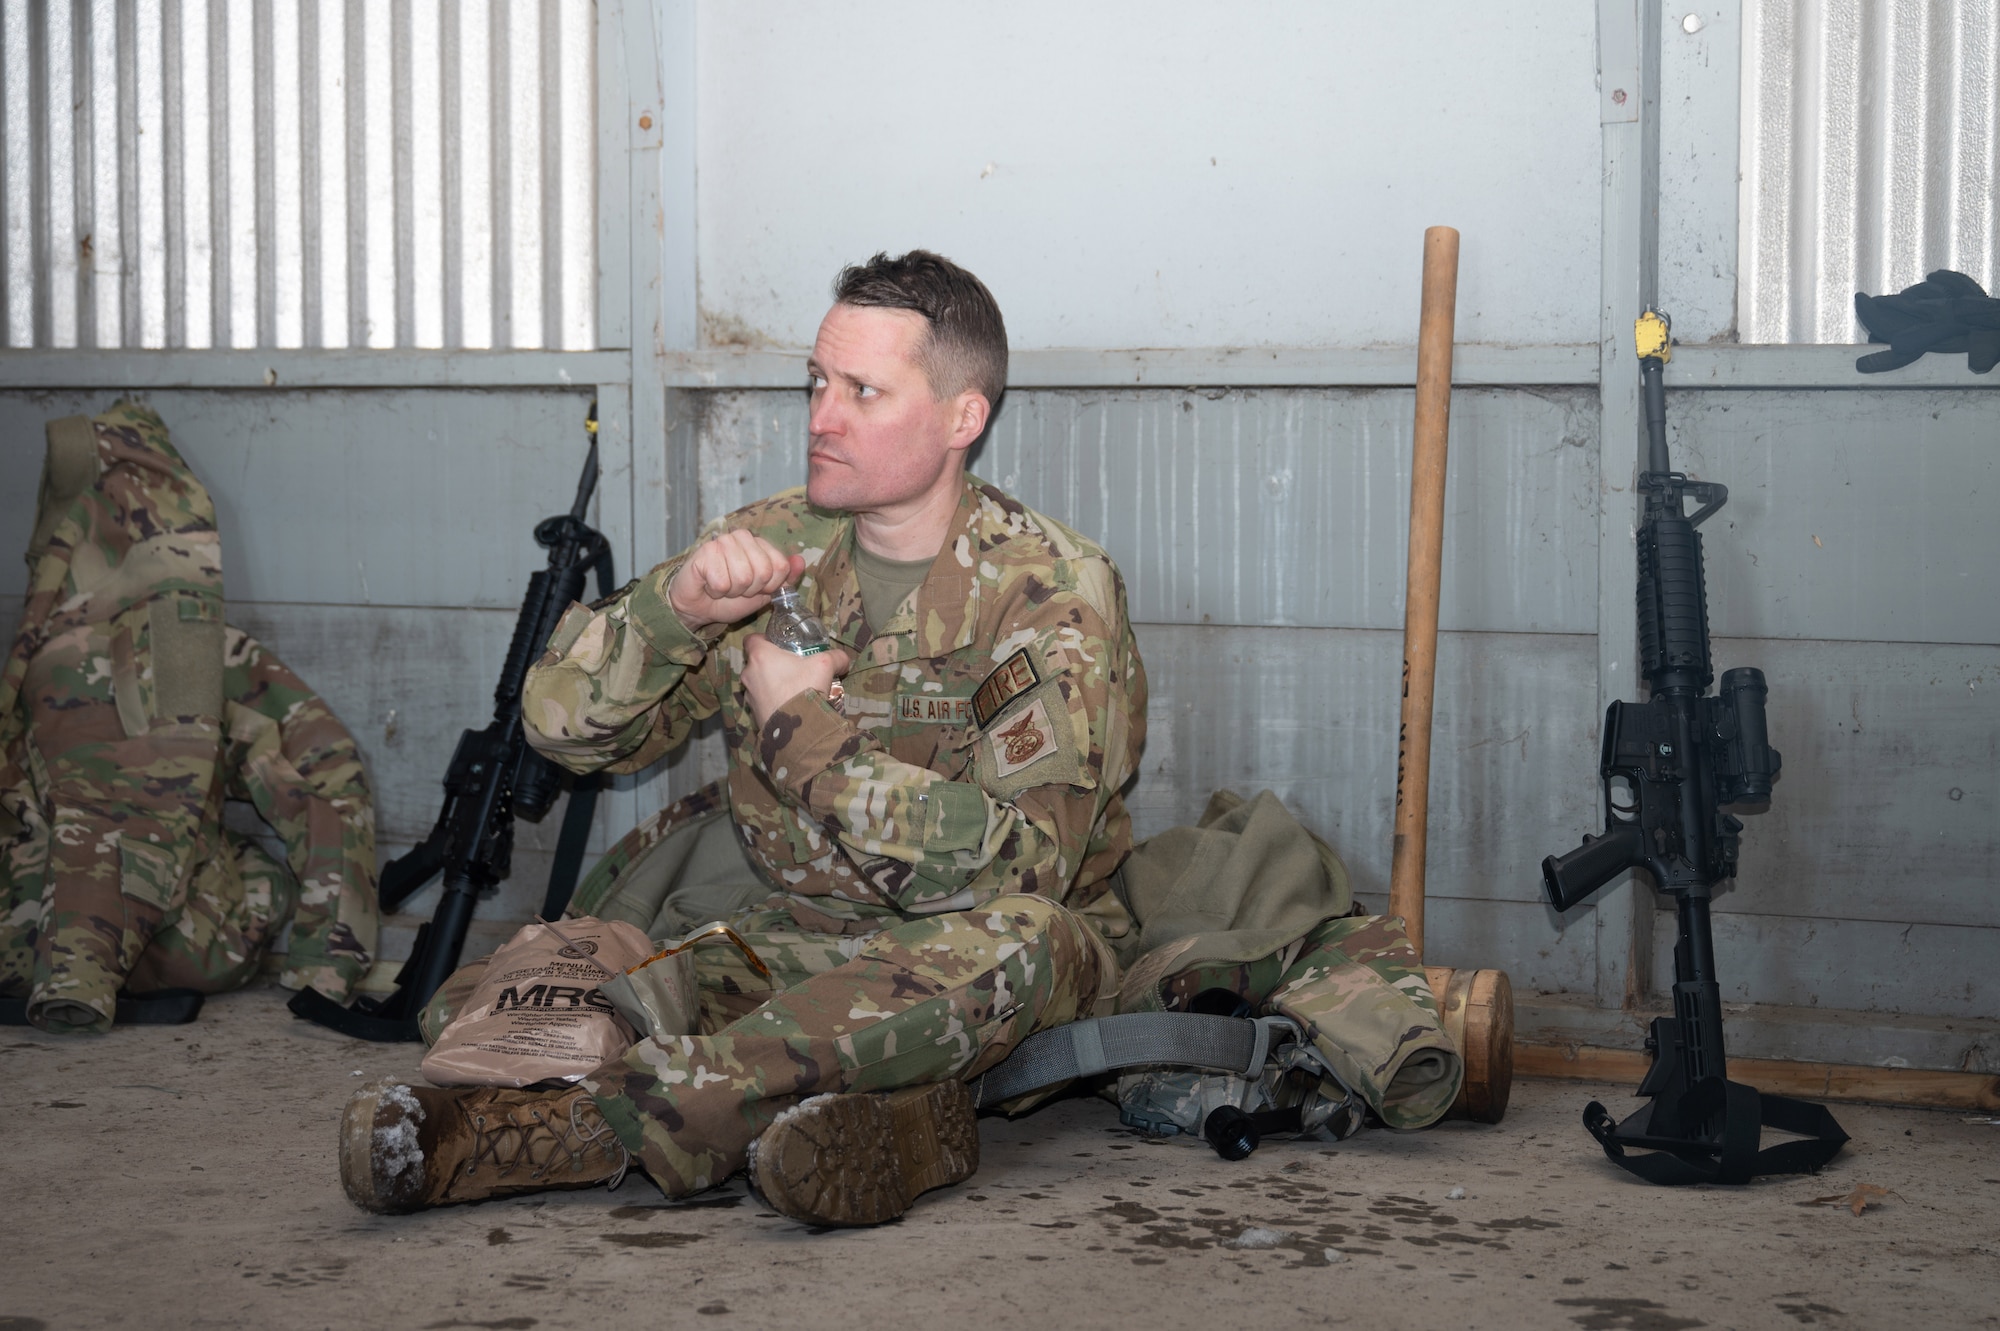 Master Sgt. Jonathan Davidson, a 934th Civil Engineering Squadron firefighter, takes a break after several hours of strenuous marching during a field exercise at Camp Ripley, Minnesota, on April 2, 2023. The 934 CES conducted a field training exercise, including land navigation and general tent setup. (U.S. Air Force photo by Senior Airman Matthew Reisdorf)